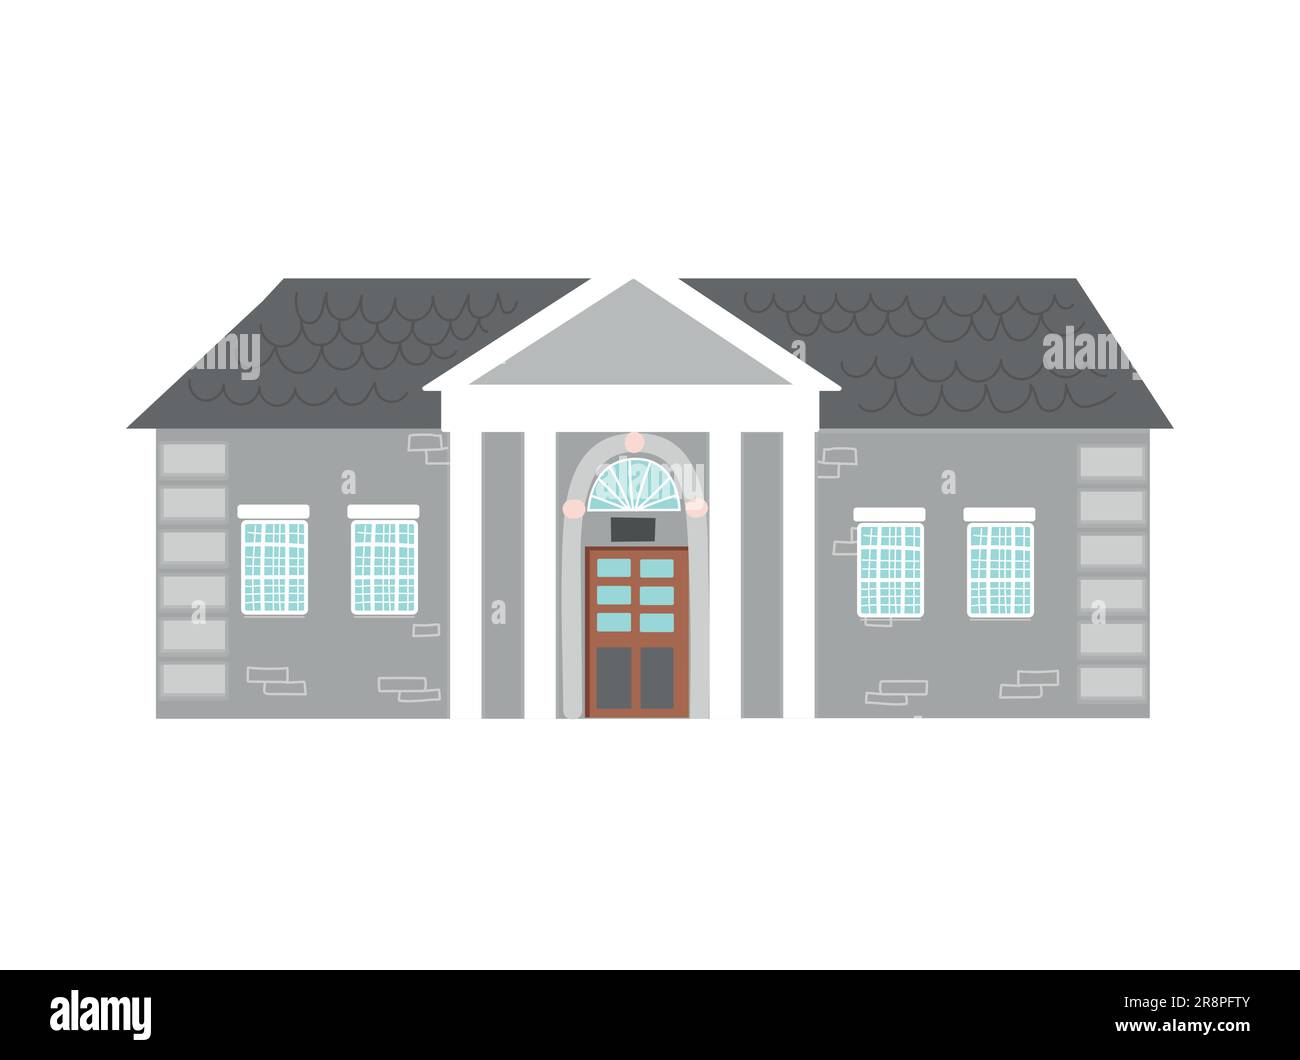 House exteriors icon. Residential town buildings architecture. Traditional home designs. Hand drawn real estate object with windows, doors and plants. Stock Vector